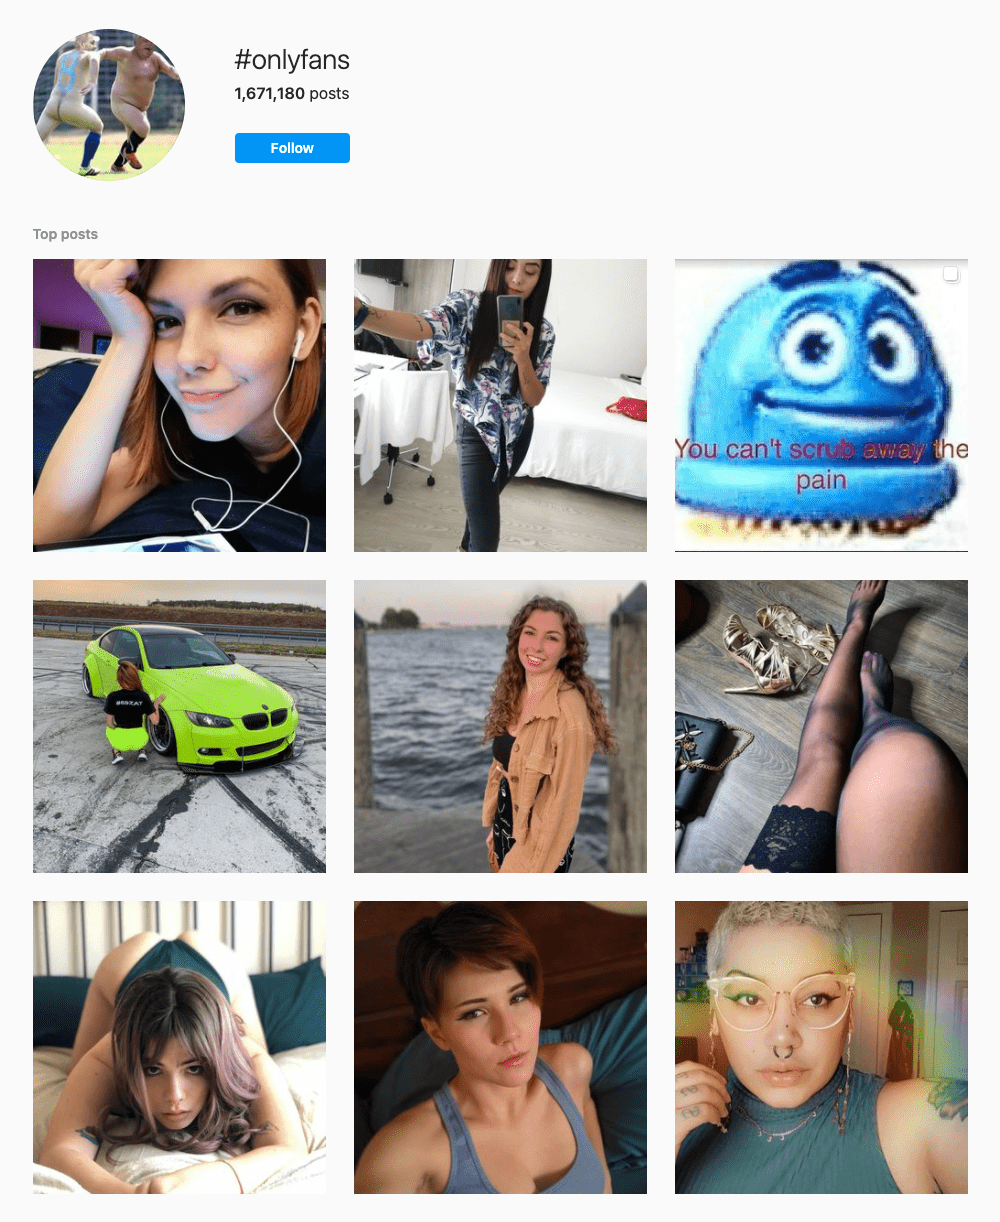 Popular onlyfans hashtags